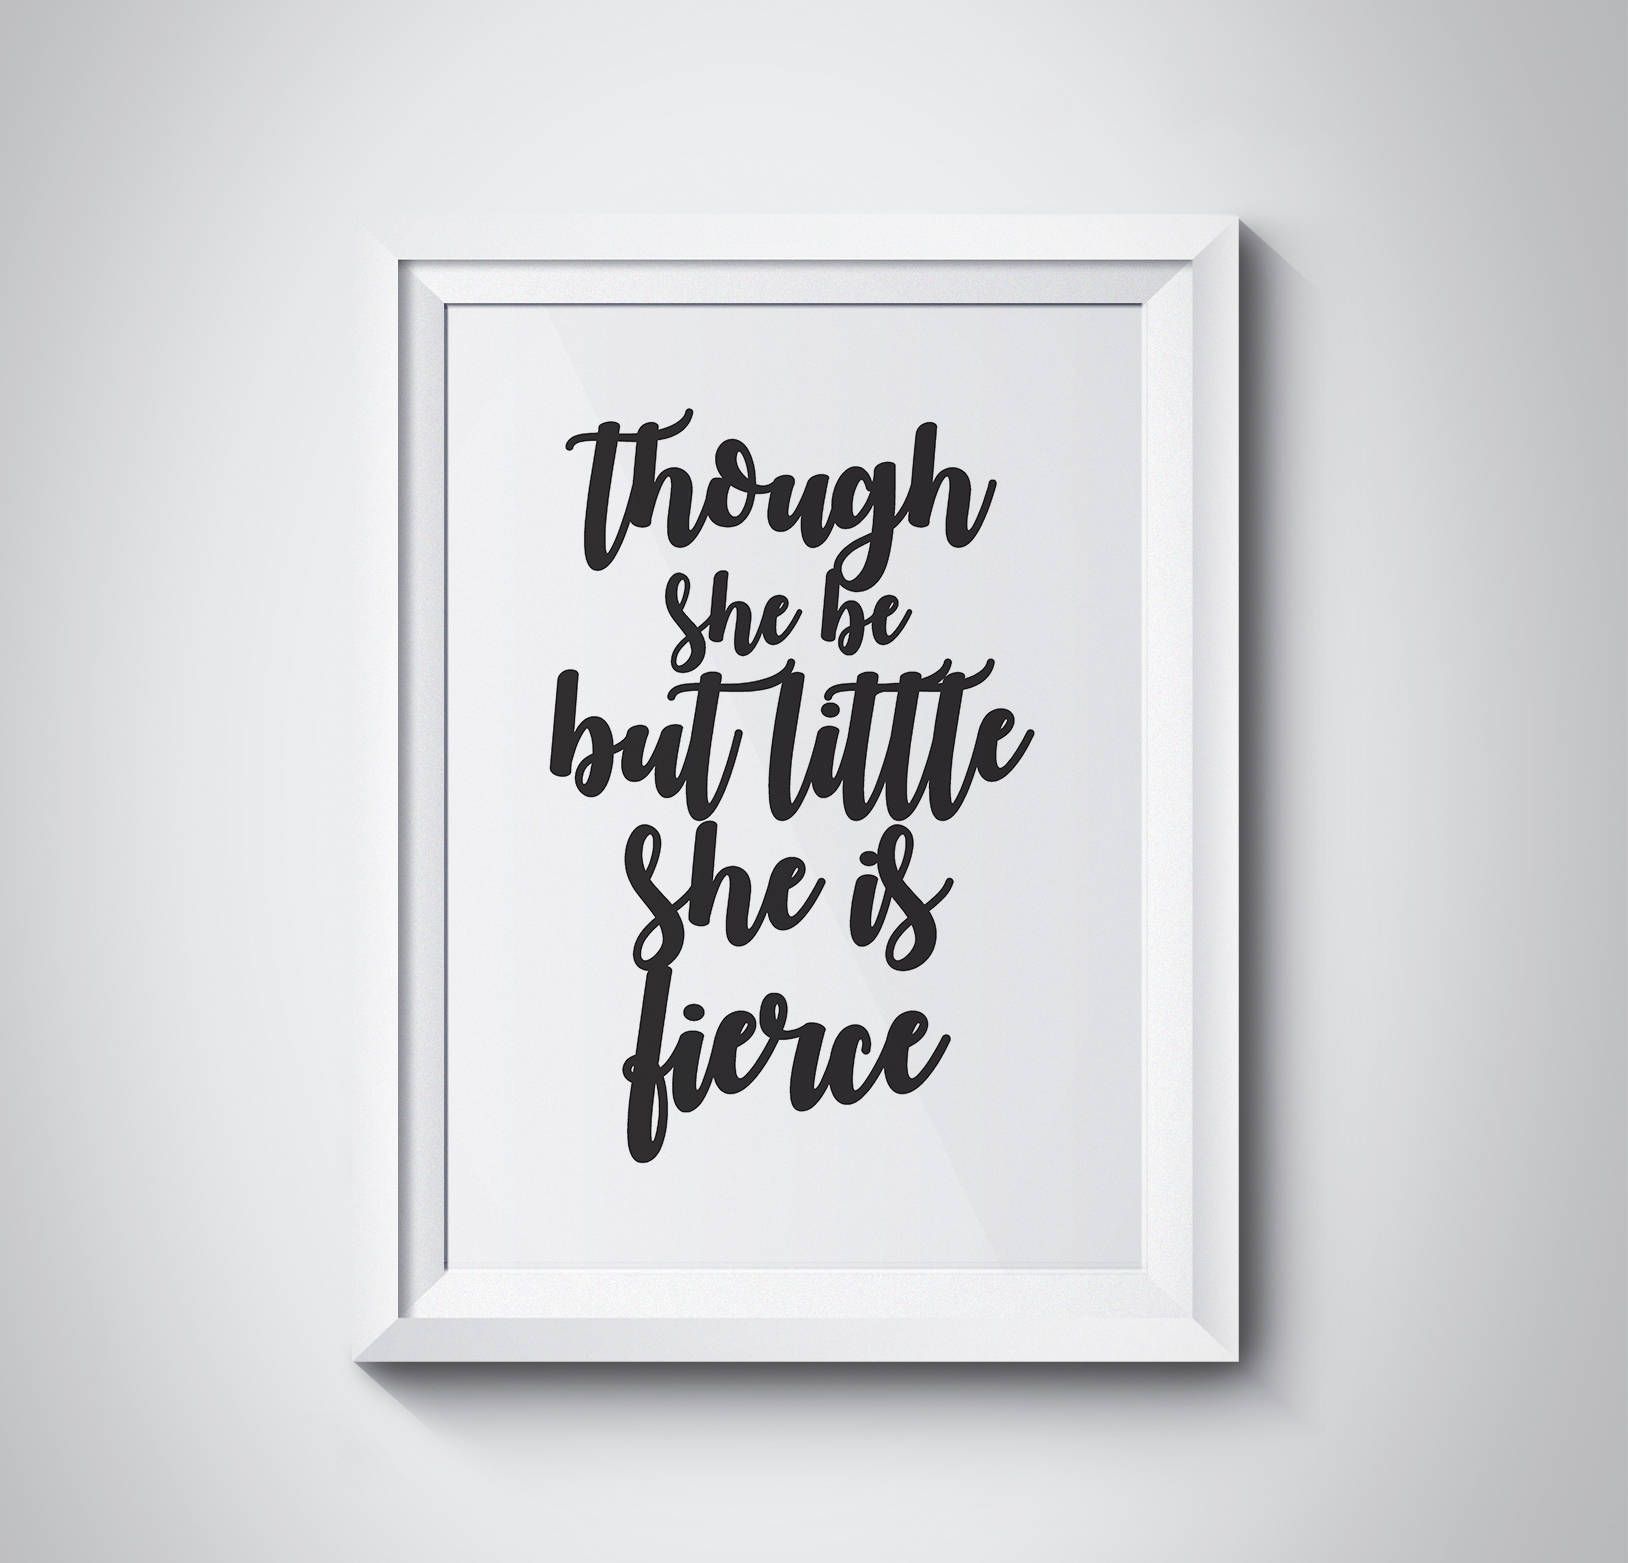 Though She Be But Little She Is Fierce, Typography Print Regarding Newest Though She Be But Little She Is Fierce Wall Art (View 9 of 20)